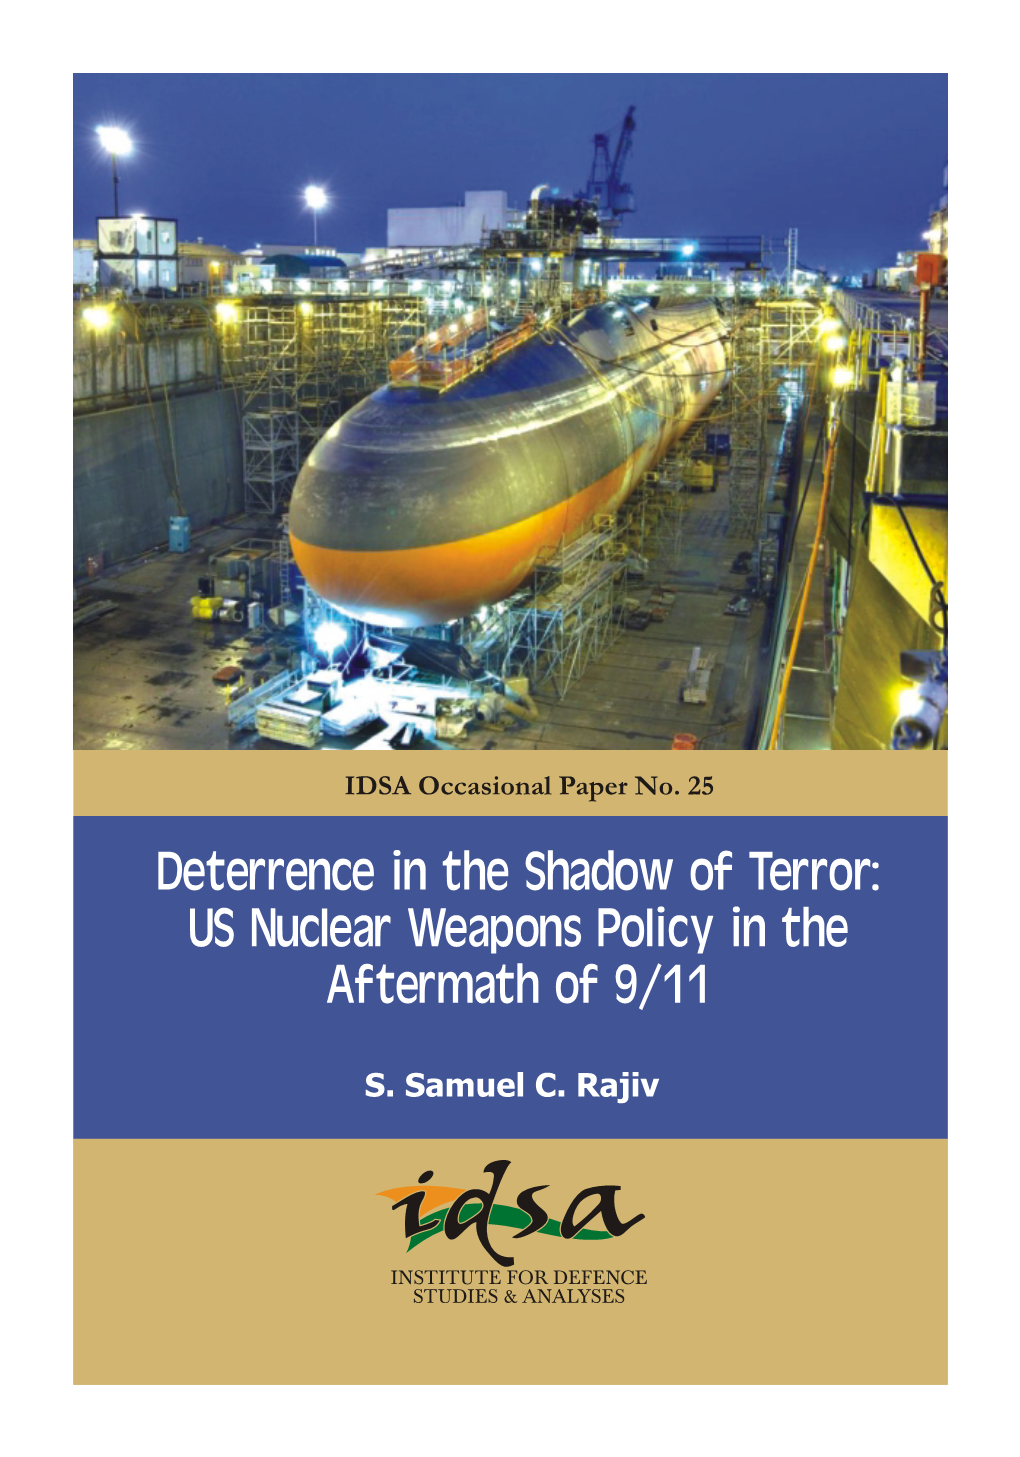 Deterrence in the Shadow of Terror: US Nuclear Weapons Policy in the Aftermath of 9/11